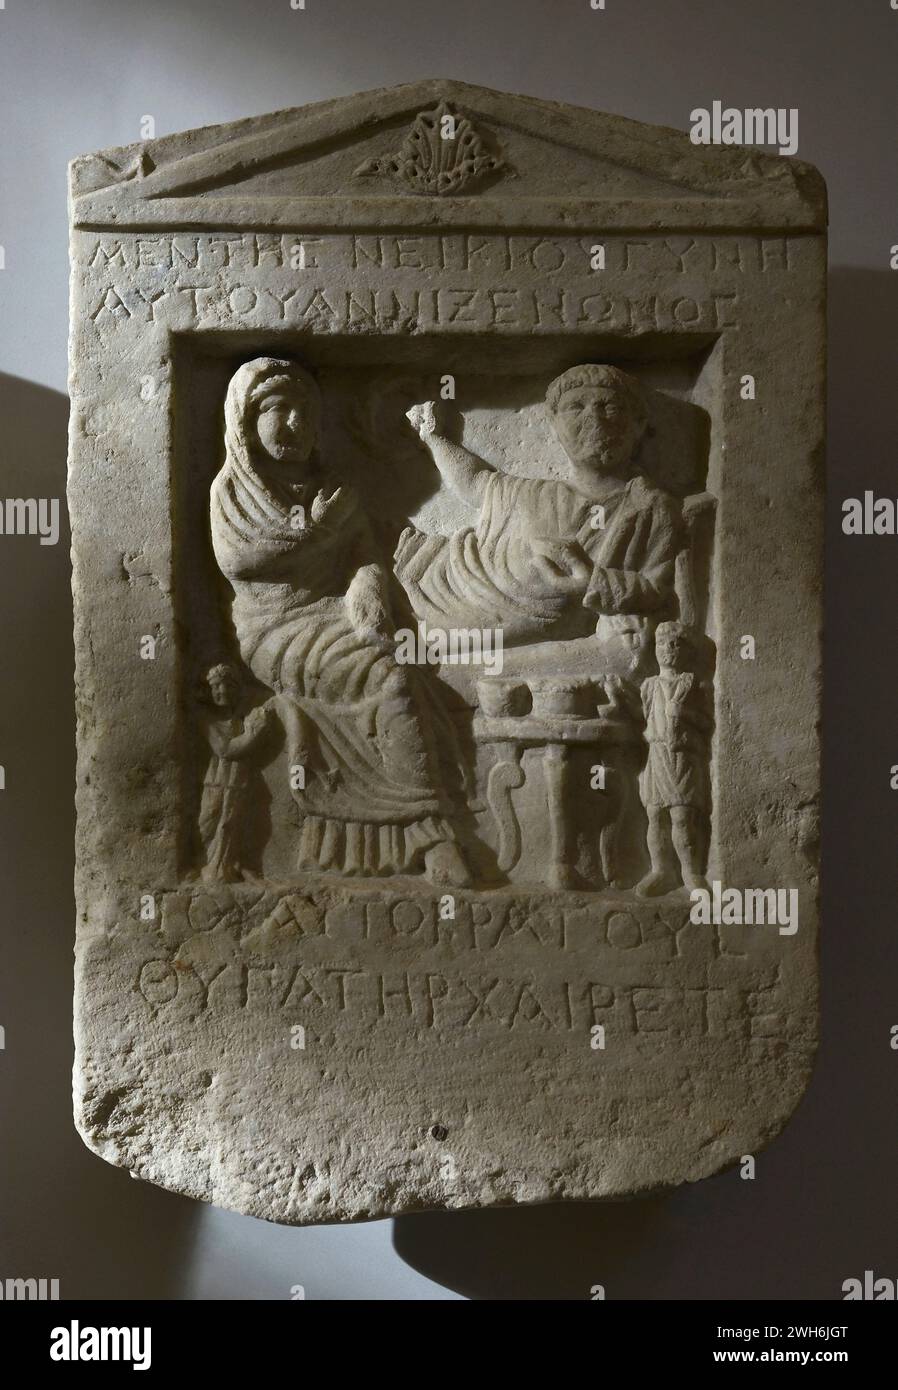 Funeral feast: a woman, a man and servants. Inscription in Greek. Stele of Mentes, son of Nikios, and his wife Anni, daughter of Xenon. Early 2nd century AD. From Varna (Odessos), Bulgaria. National Archaeological Museum. Sofia. Bulgaria. Stock Photo